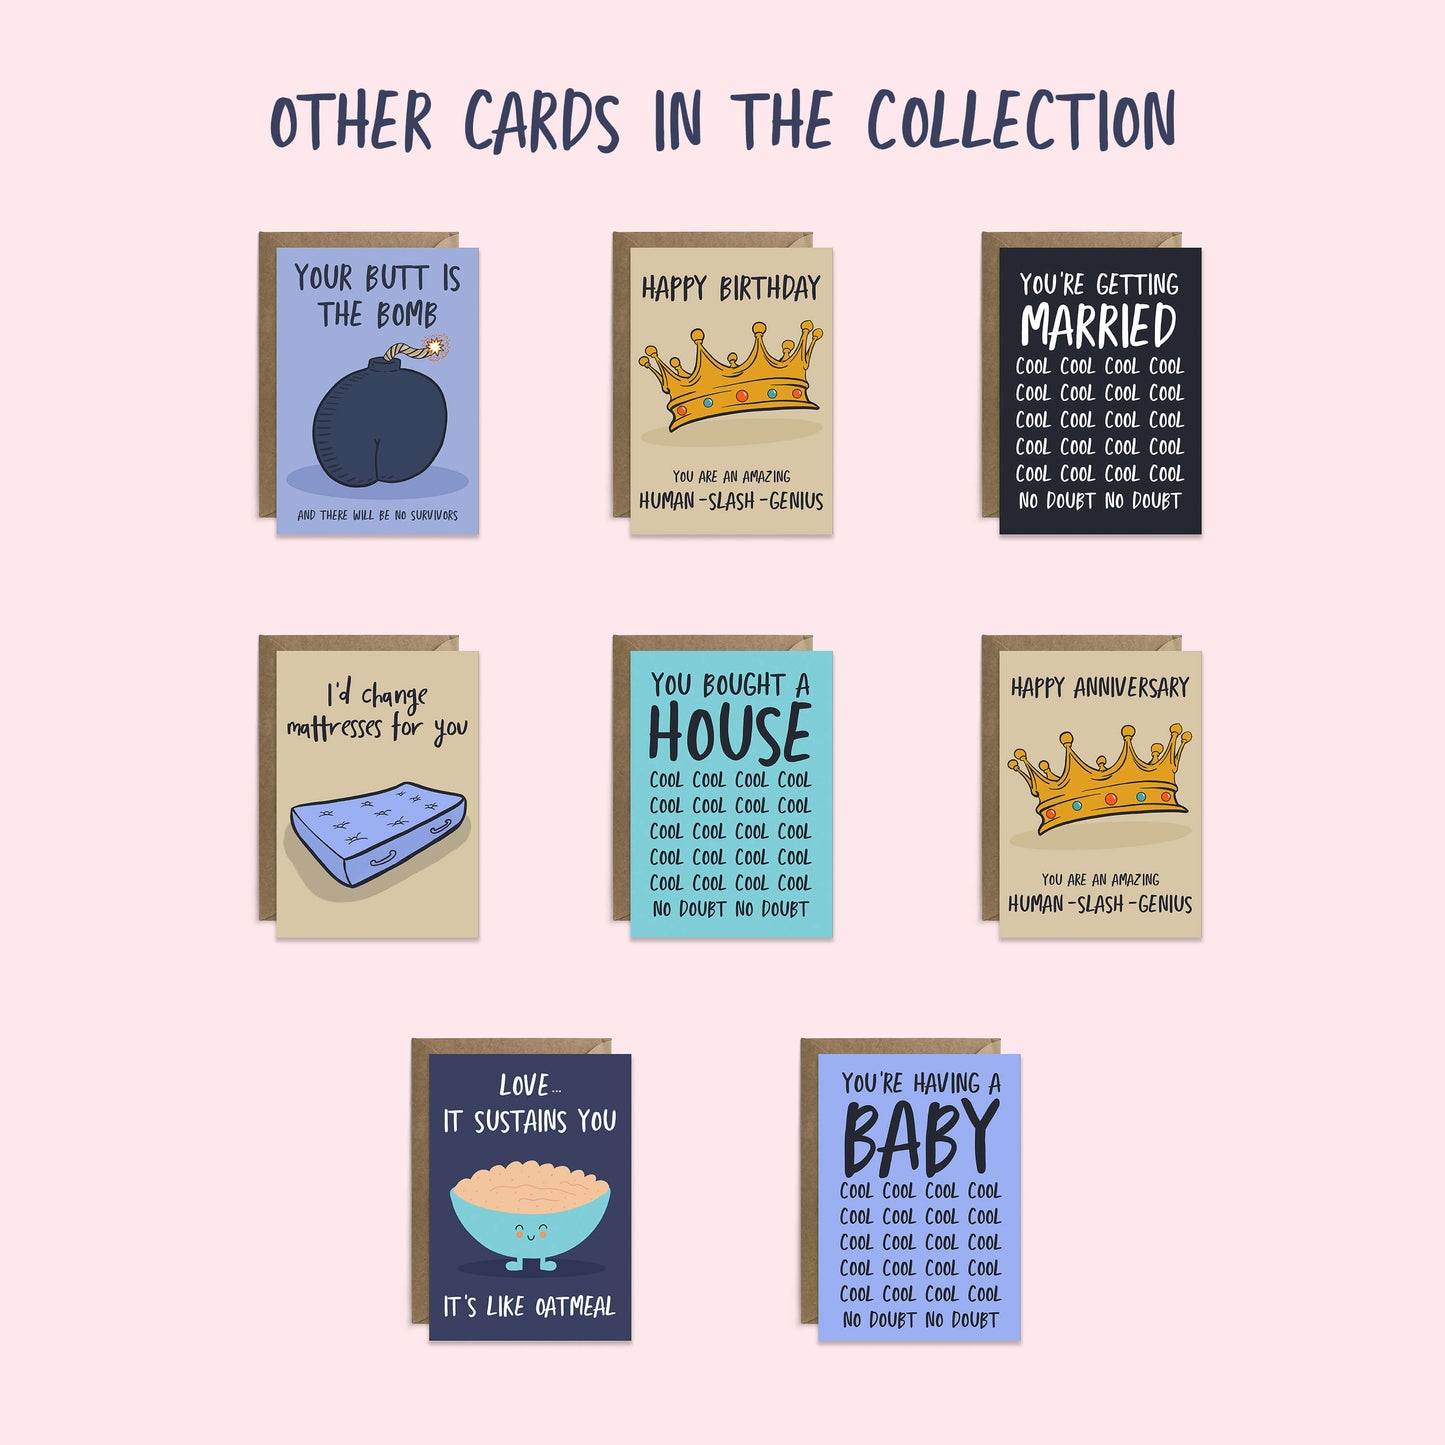 Brooklyn 99 card collection image showing all cards in this range as a collection.